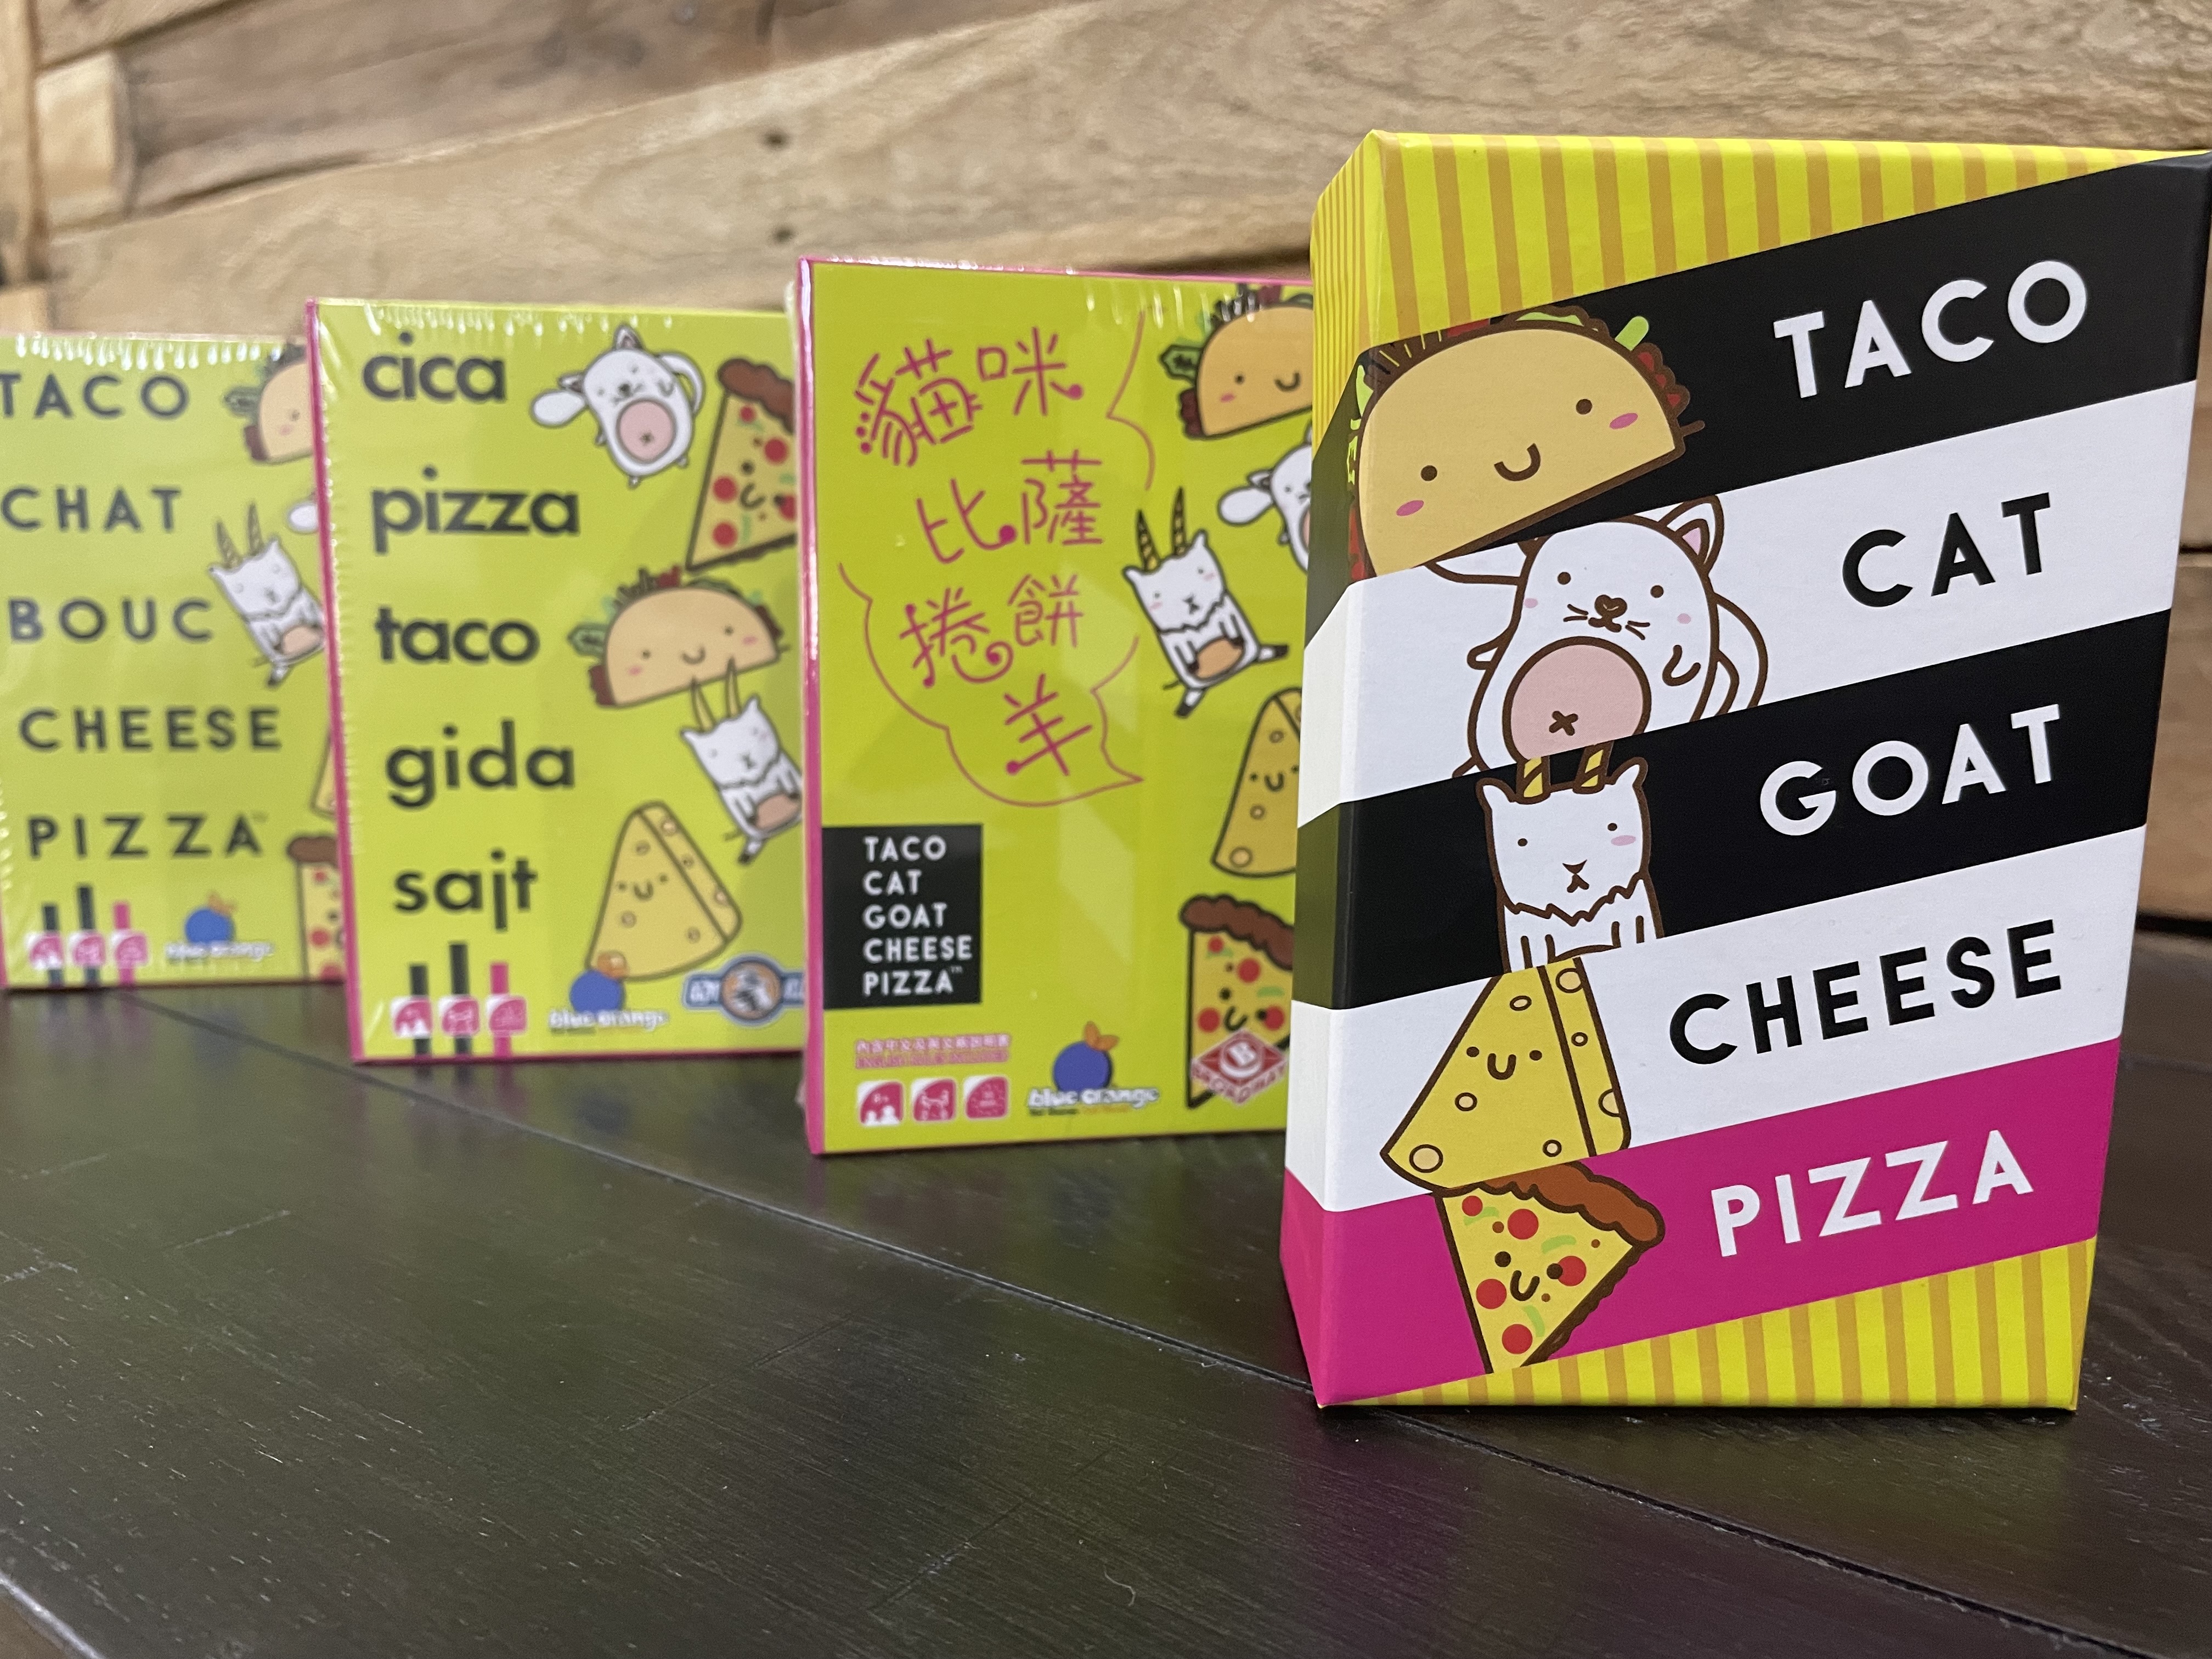 TACO CHAT BOUC CHEESE PIZZA - DAVE CAMPBELL